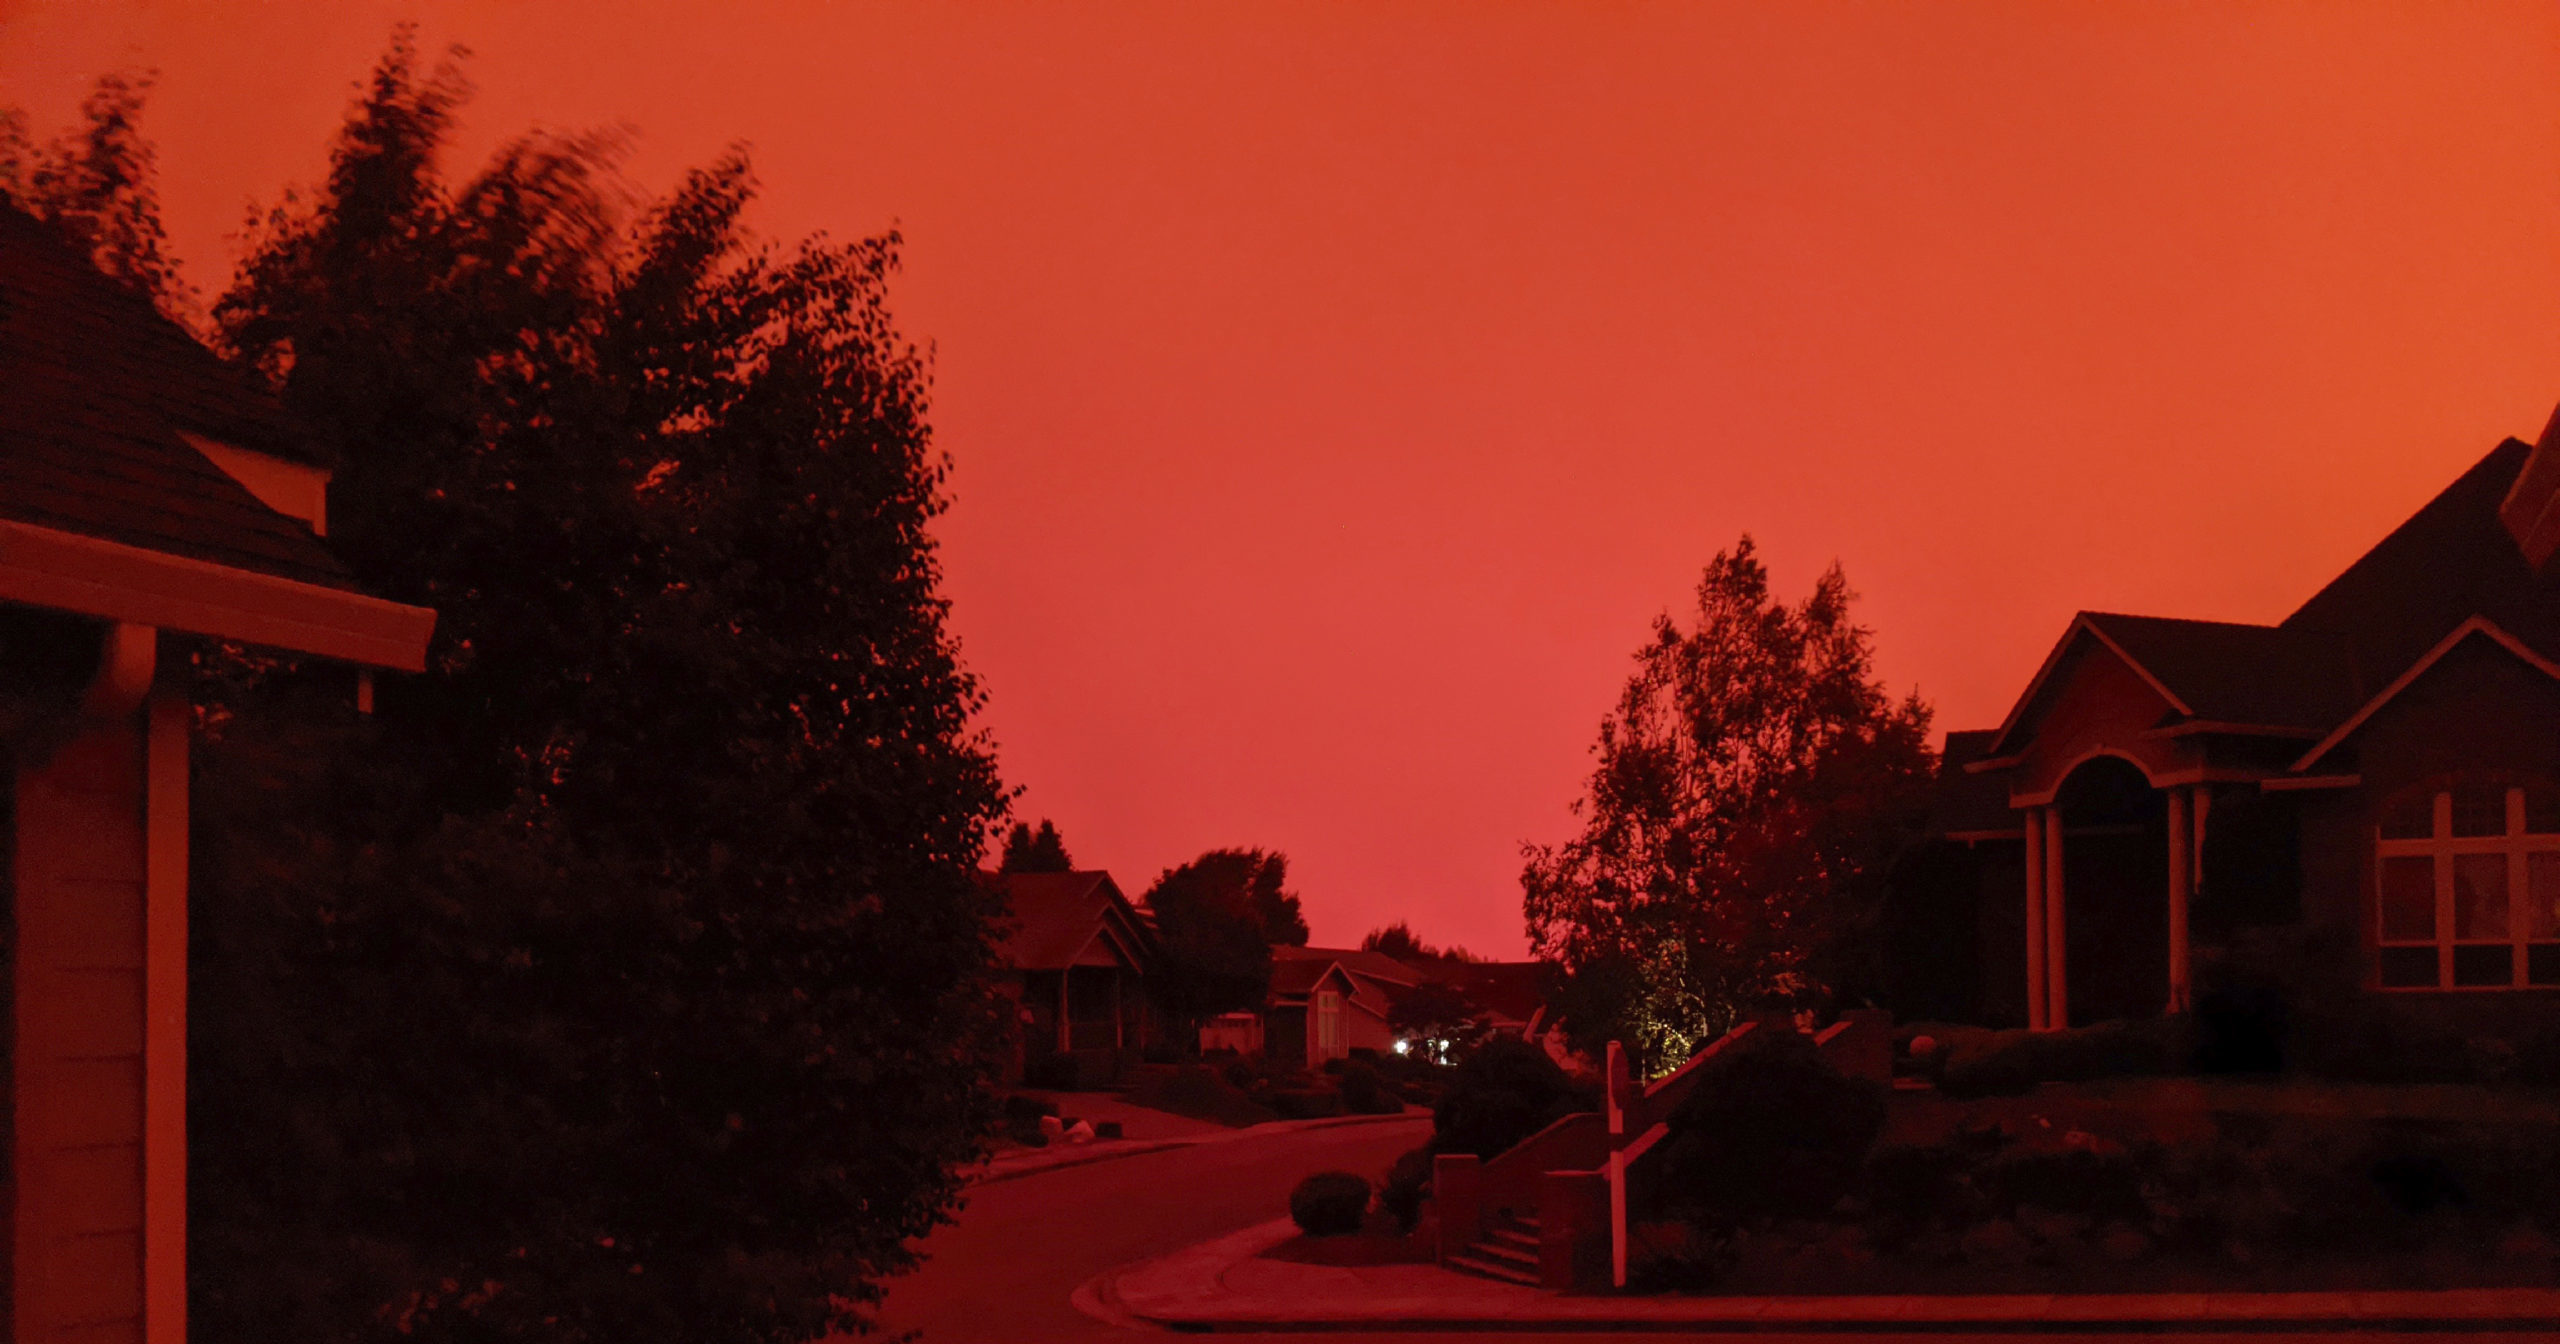 WildfiresThe sky appears red due to fires raging across the Pacific Northwest. are raging across the Pacific Northwest.